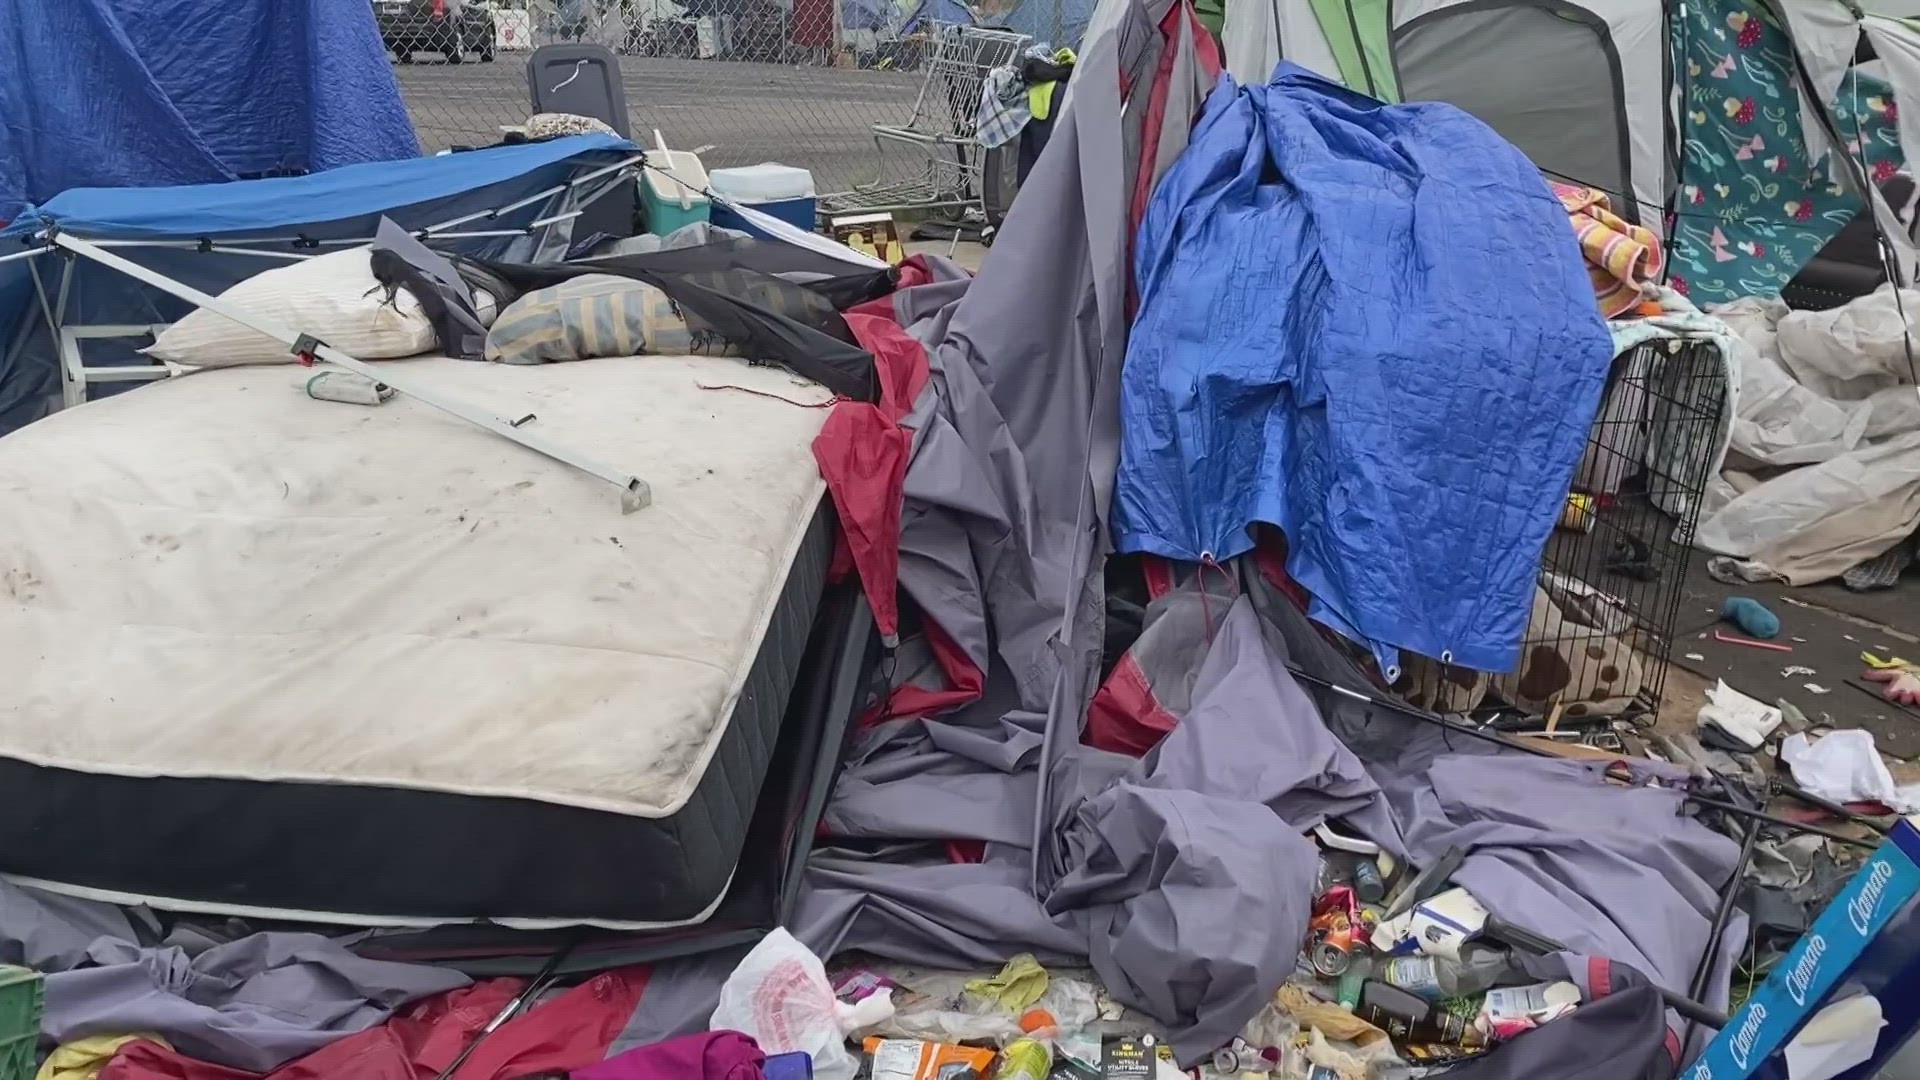 A judge has ruled in favor of the downtown residents and business owners who filed a lawsuit against the city for not addressing the large homeless encampment.